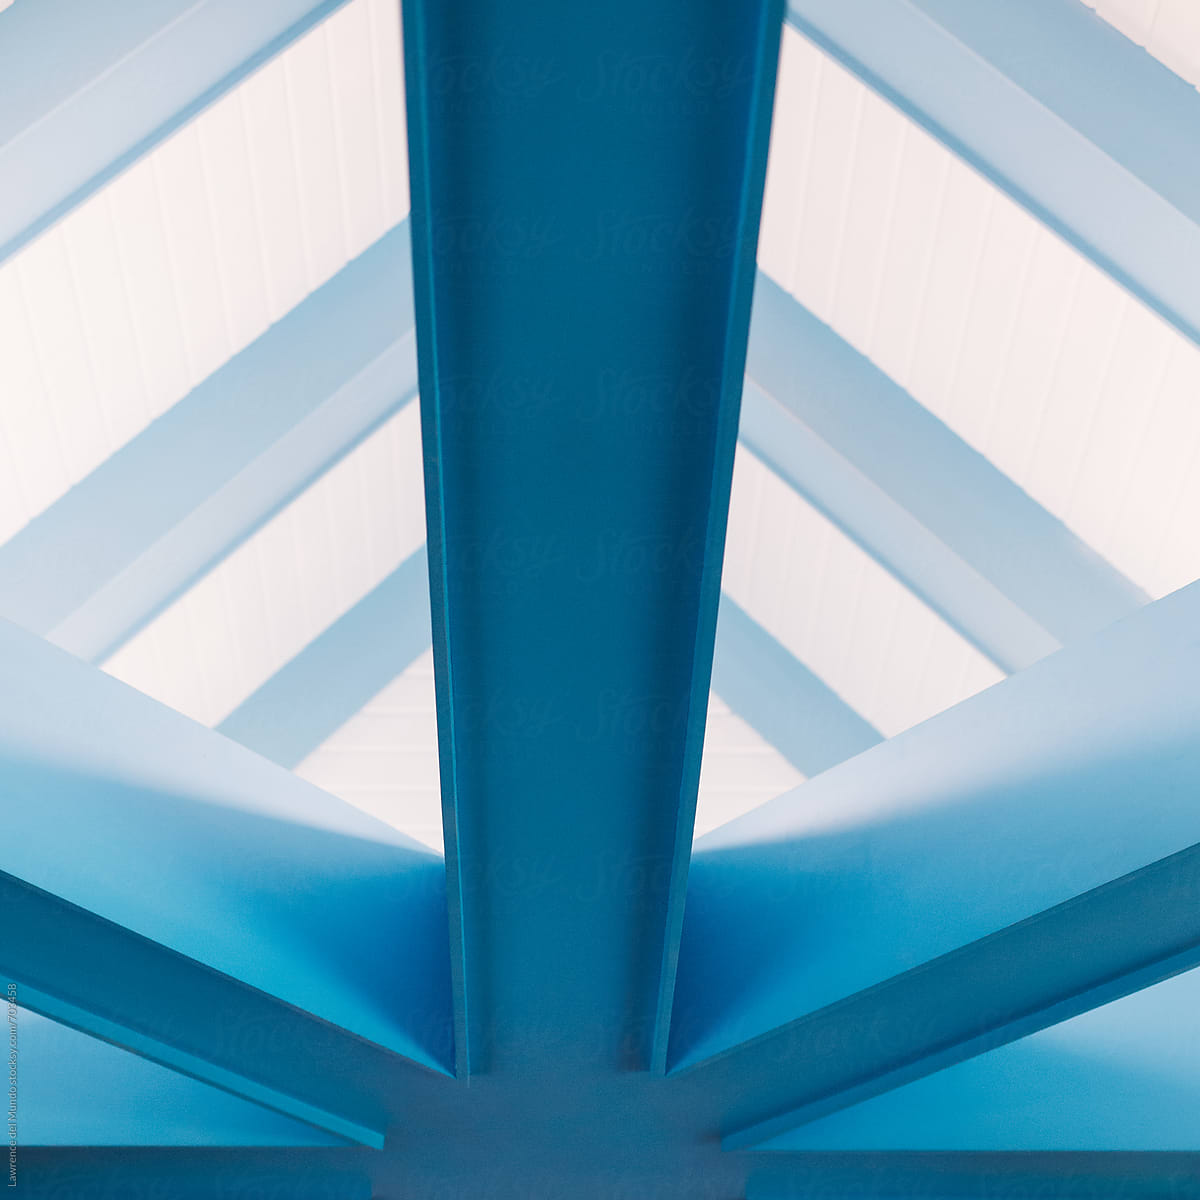 Detail of and closer view of the light on the light blue beams supporting the roof  of a restaurant